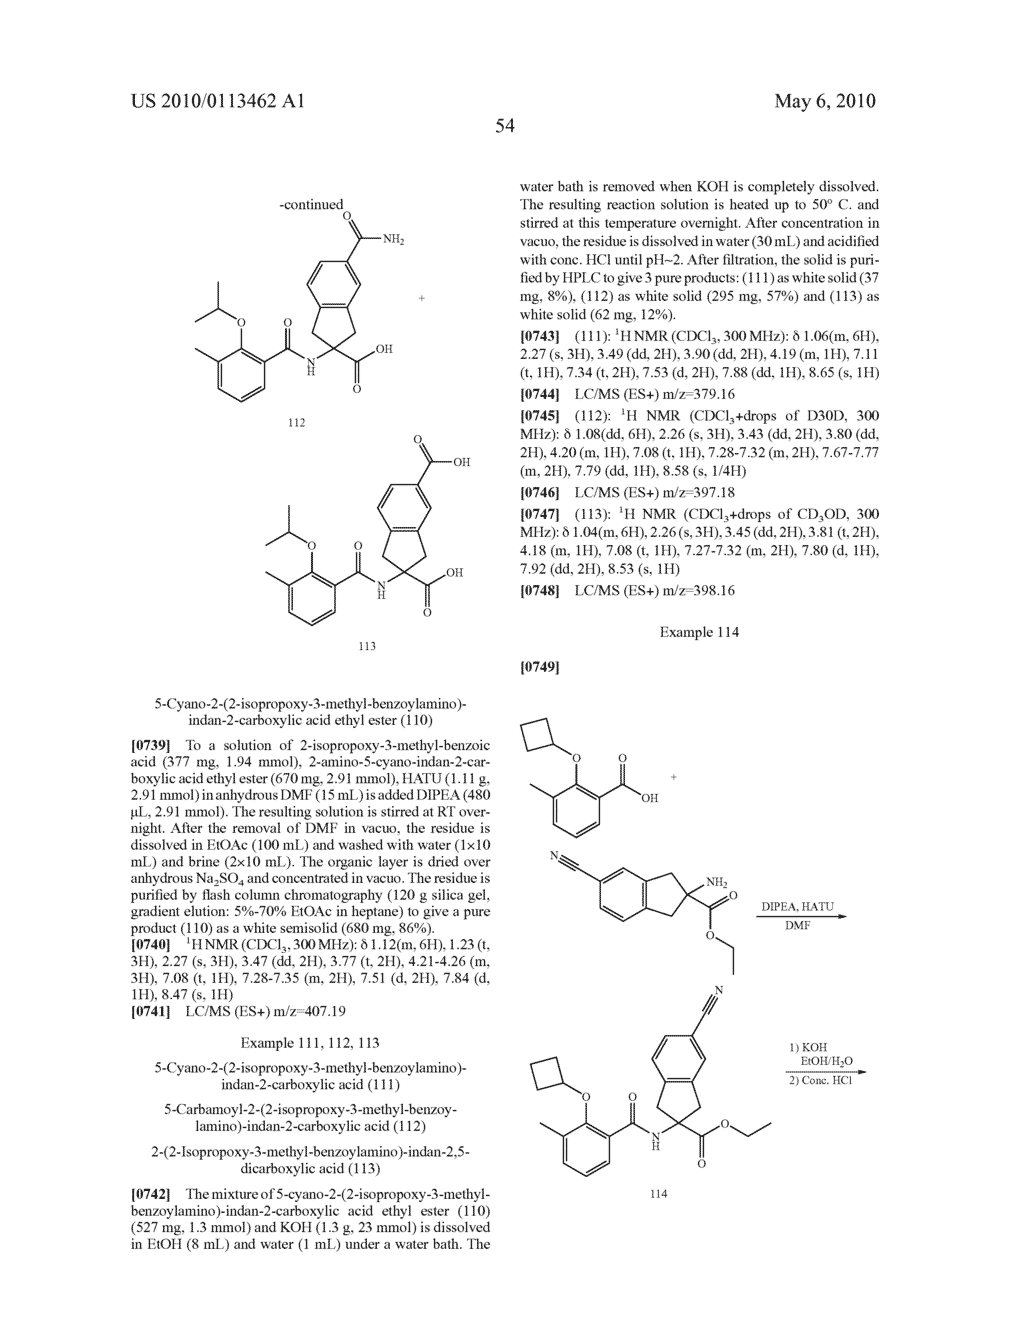 SUBSTITUTED BENZOYLAMINO-INDAN-2-CARBOXYLIC ACIDS AND RELATED COMPOUNDS - diagram, schematic, and image 55